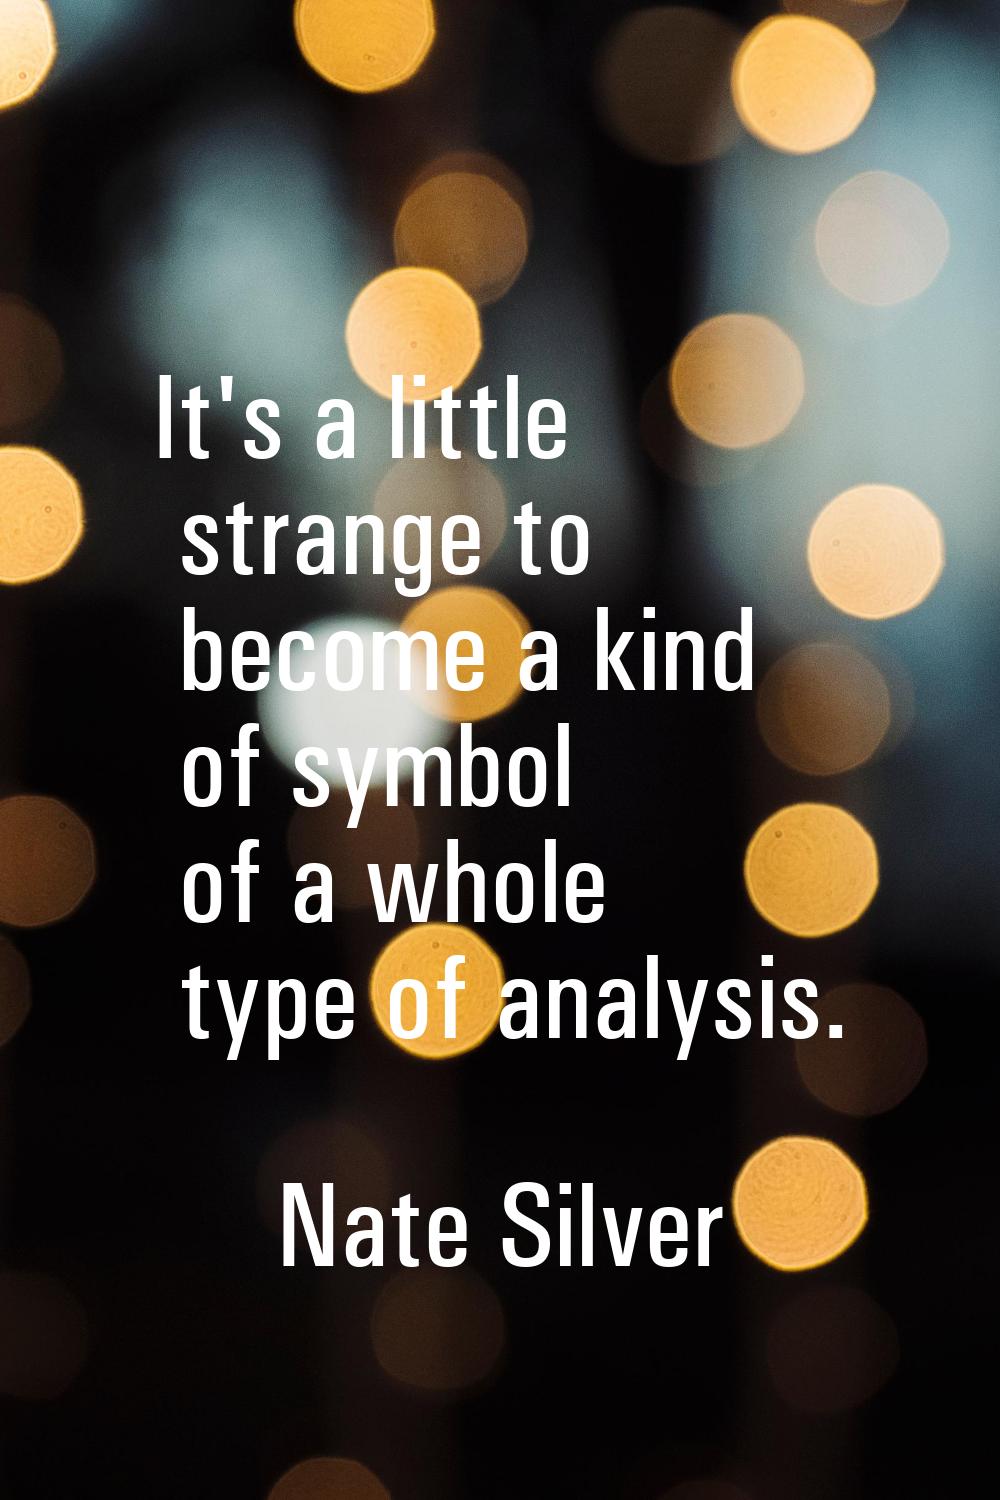 It's a little strange to become a kind of symbol of a whole type of analysis.